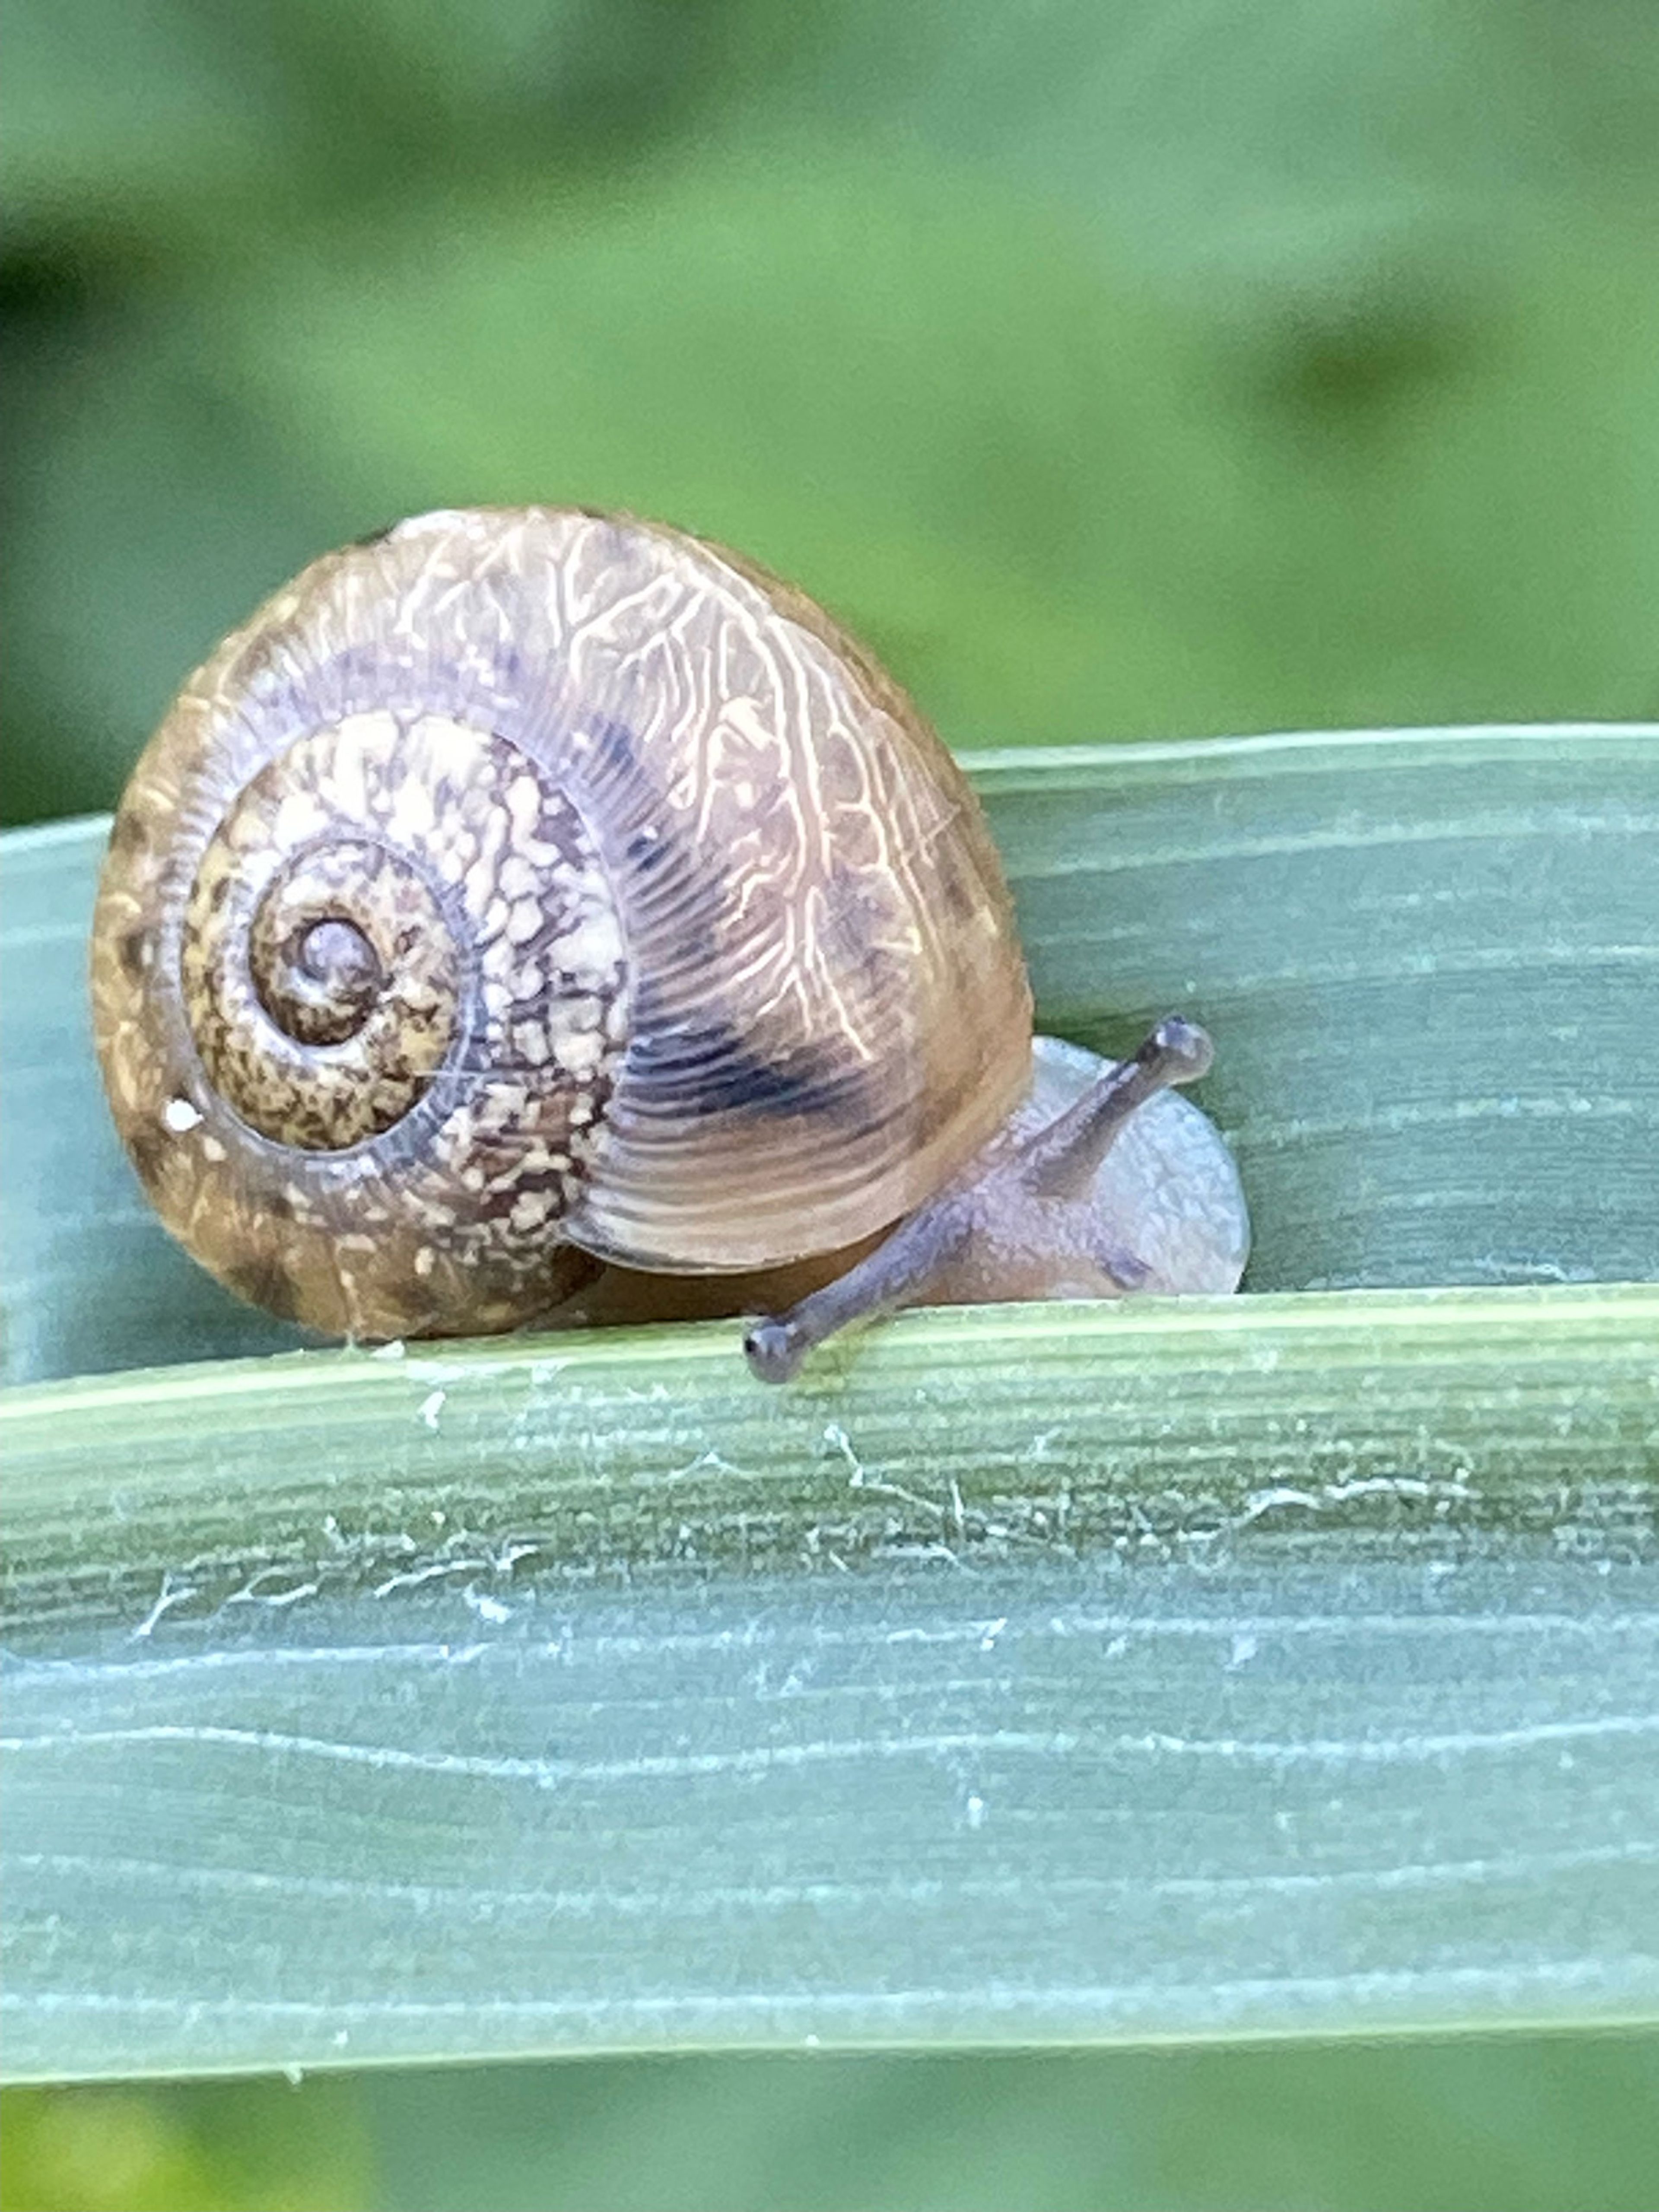 Found this cute, little snail in my garden on Sunday, June 23.